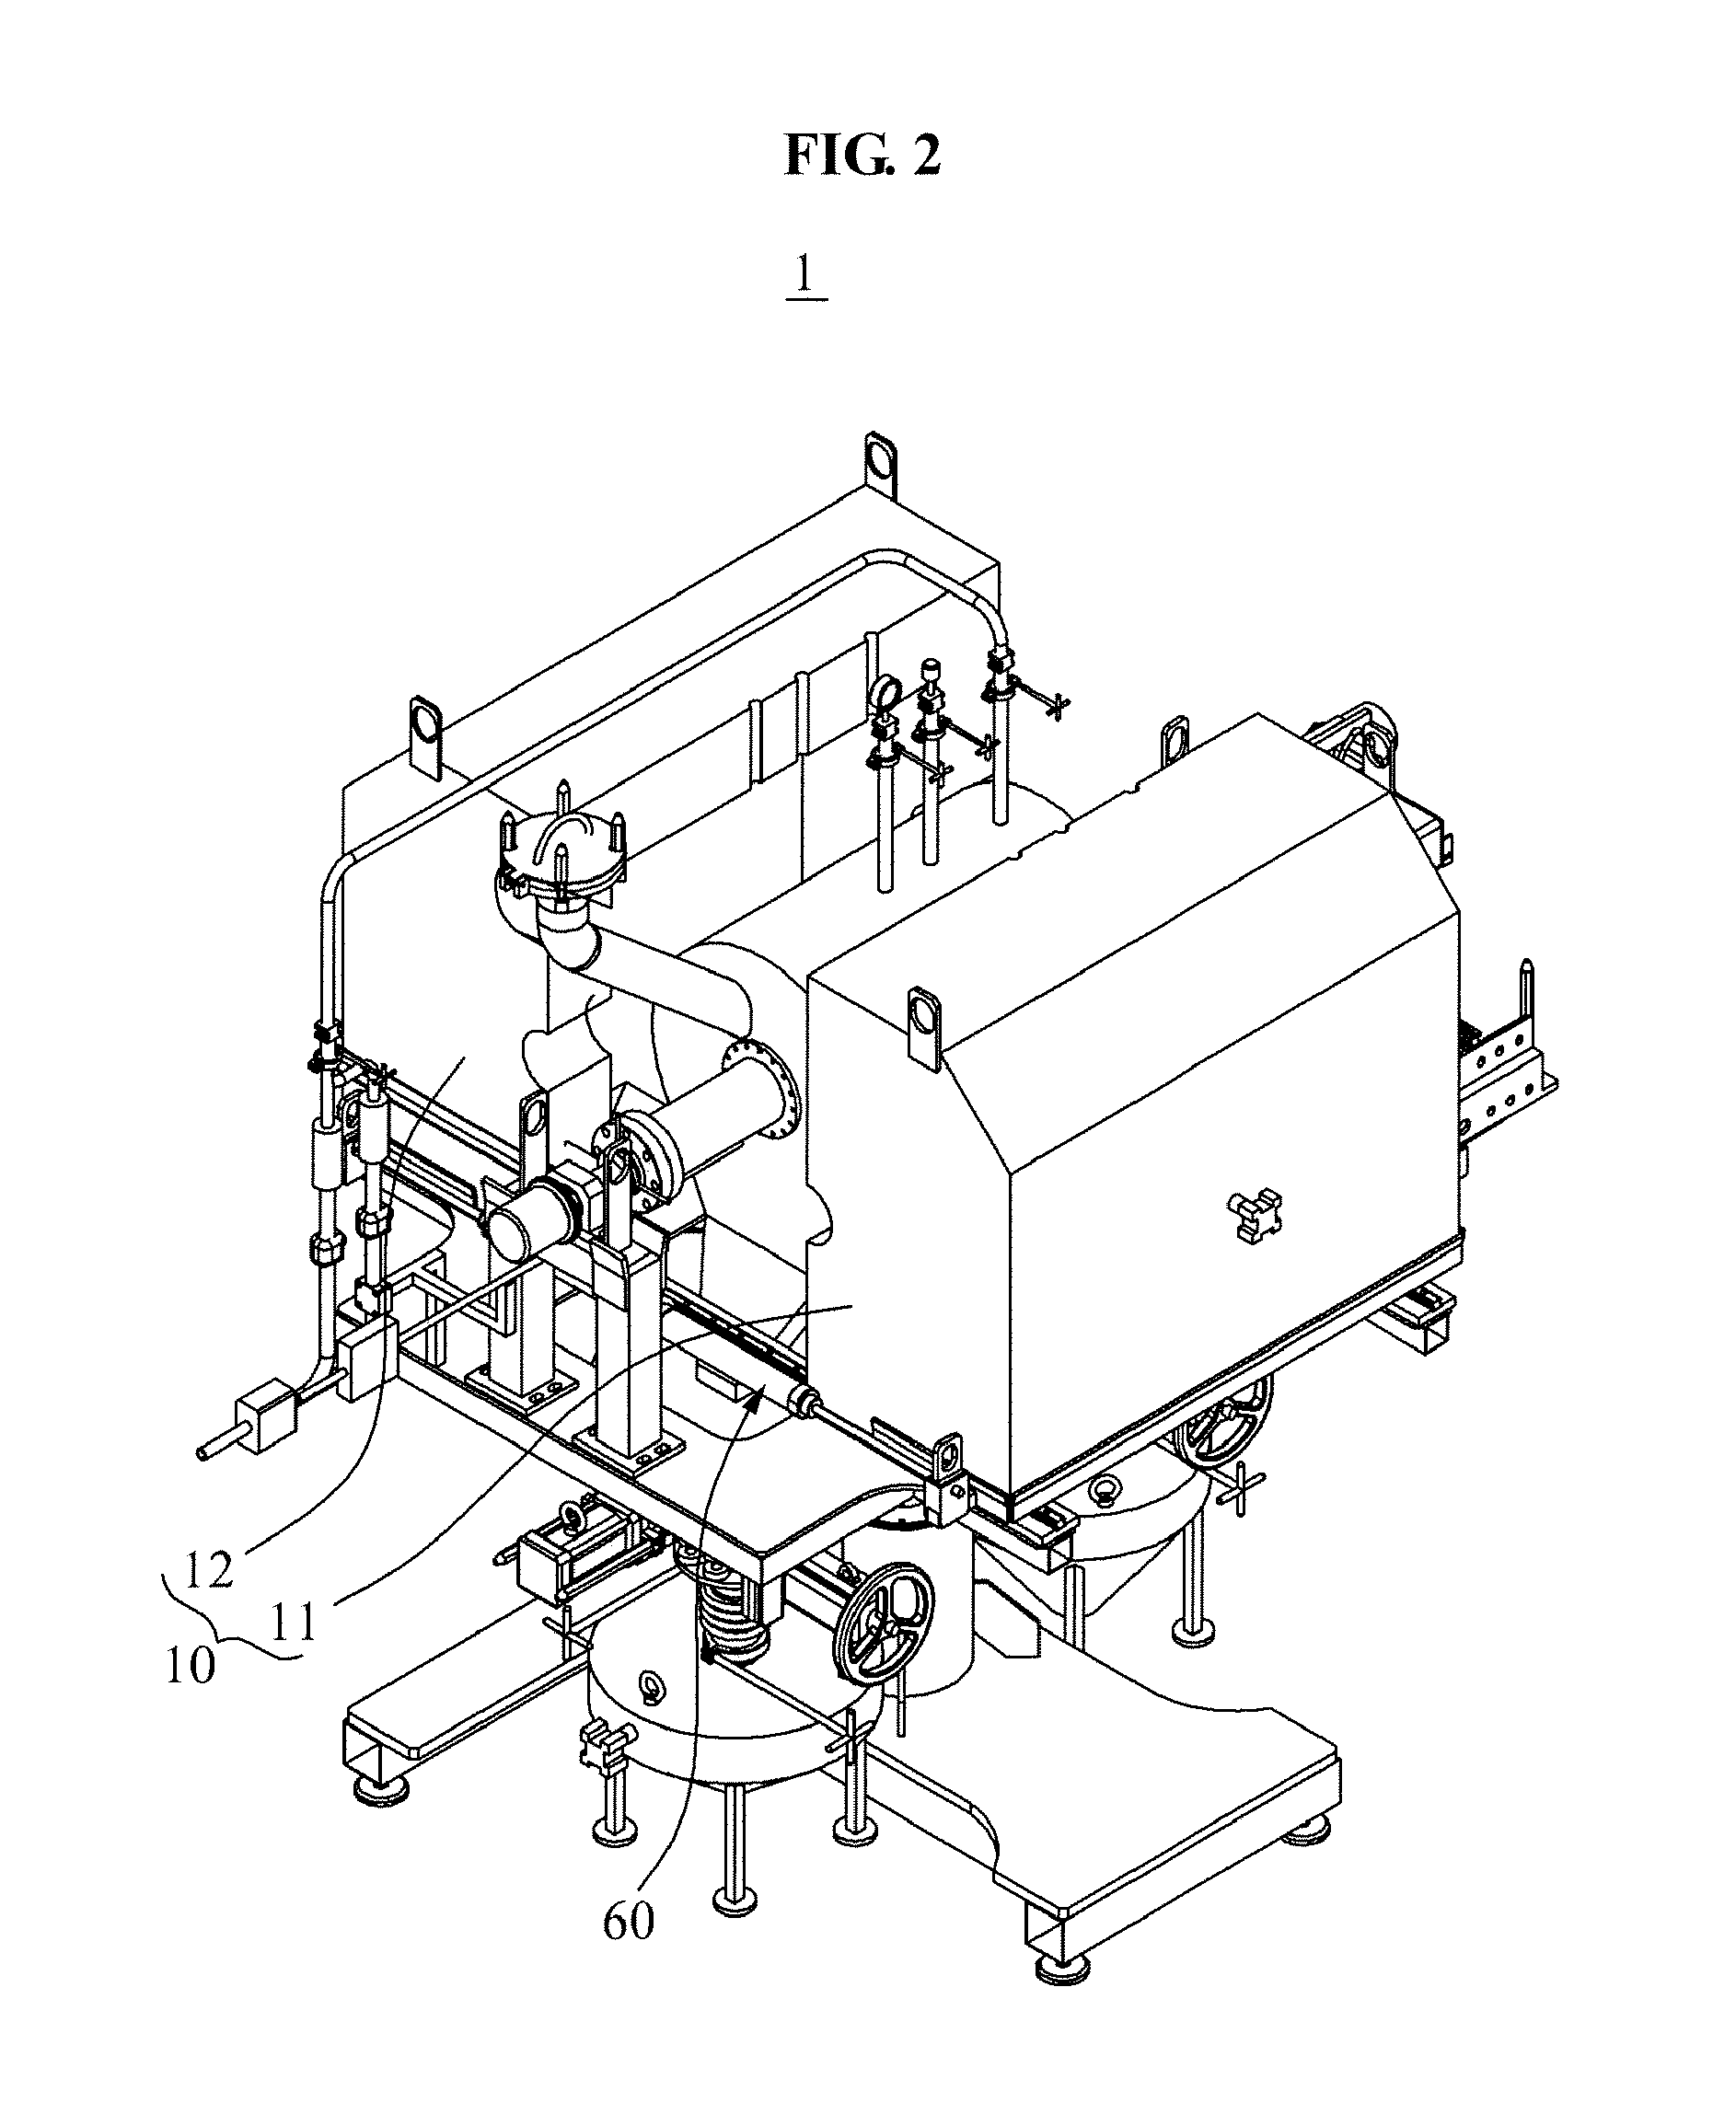 Prefabricated vol-oxidizer for spent nuclear fuel for convenient operation and maintenance